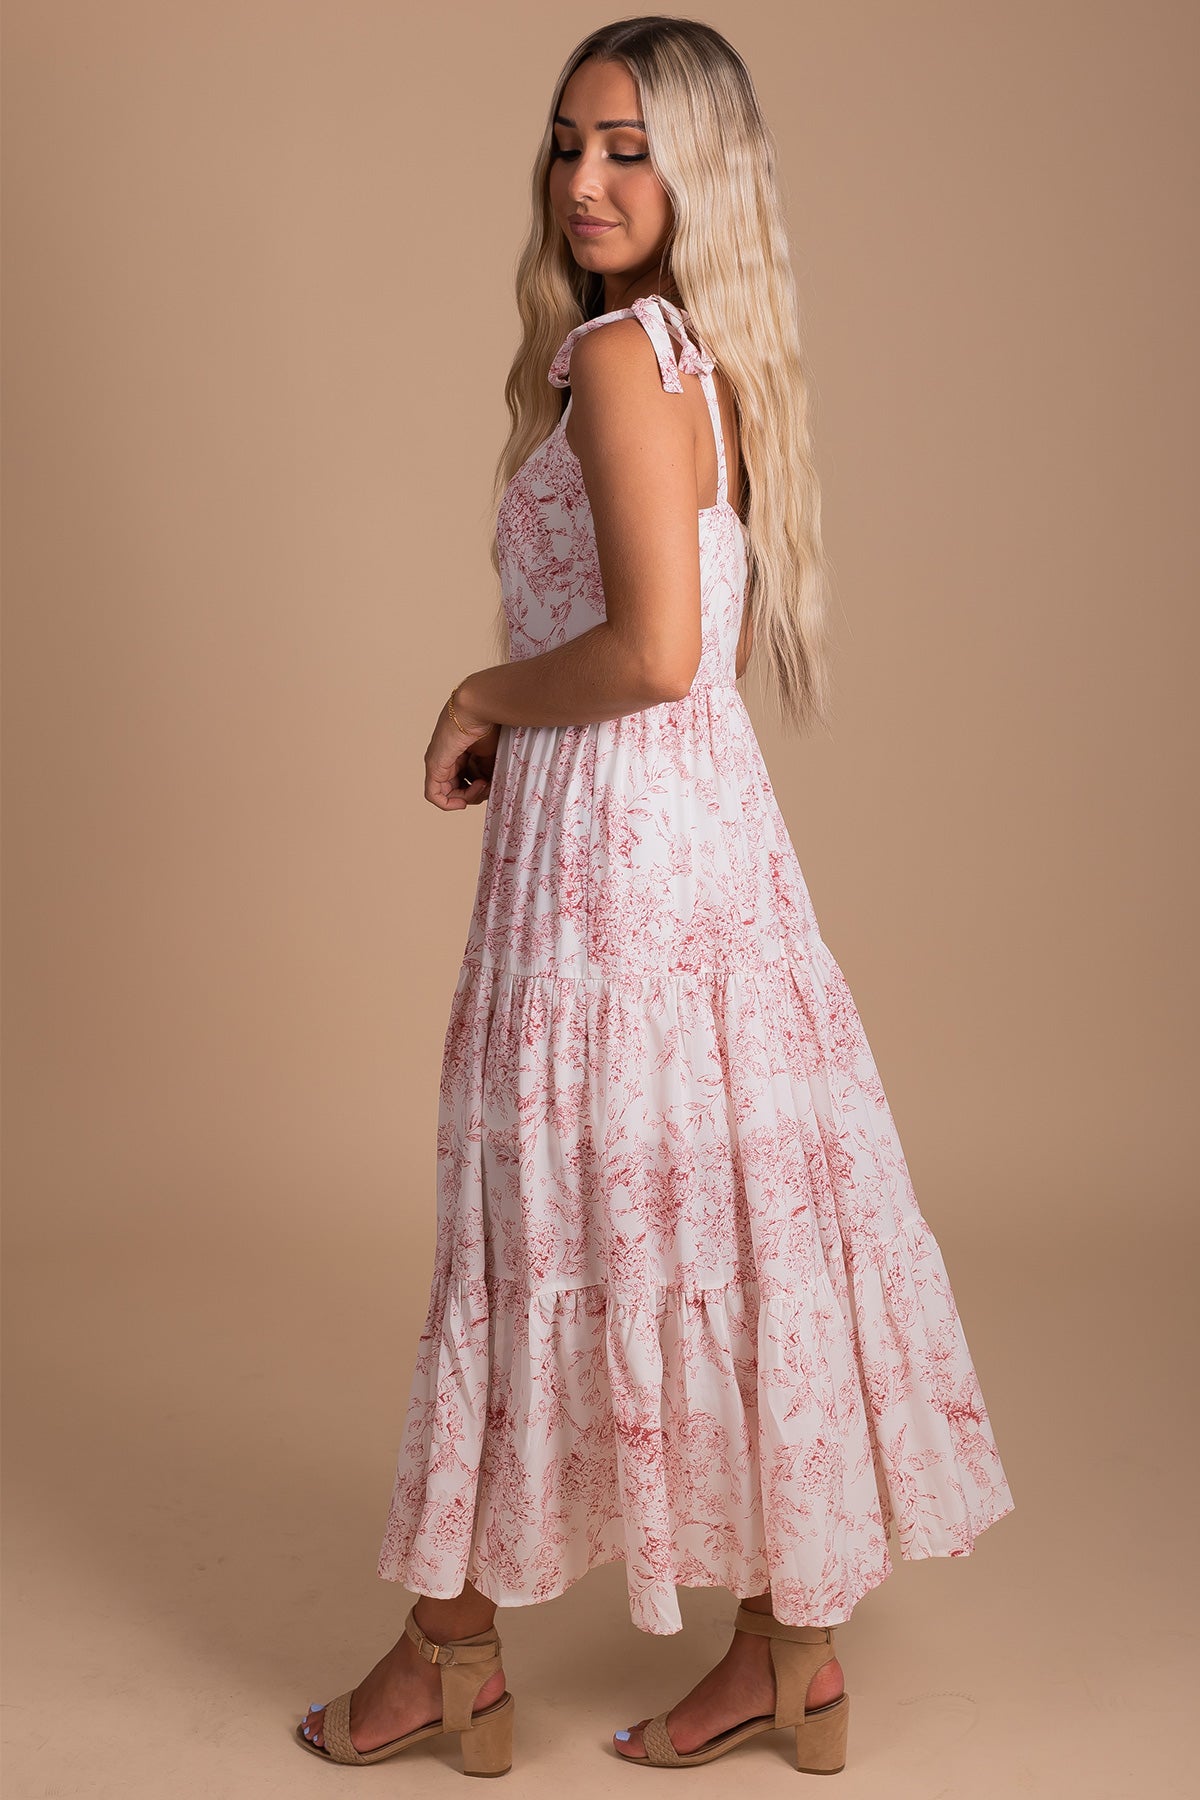 Women's Boutique Maxi Dress with Floral Print in White and Red